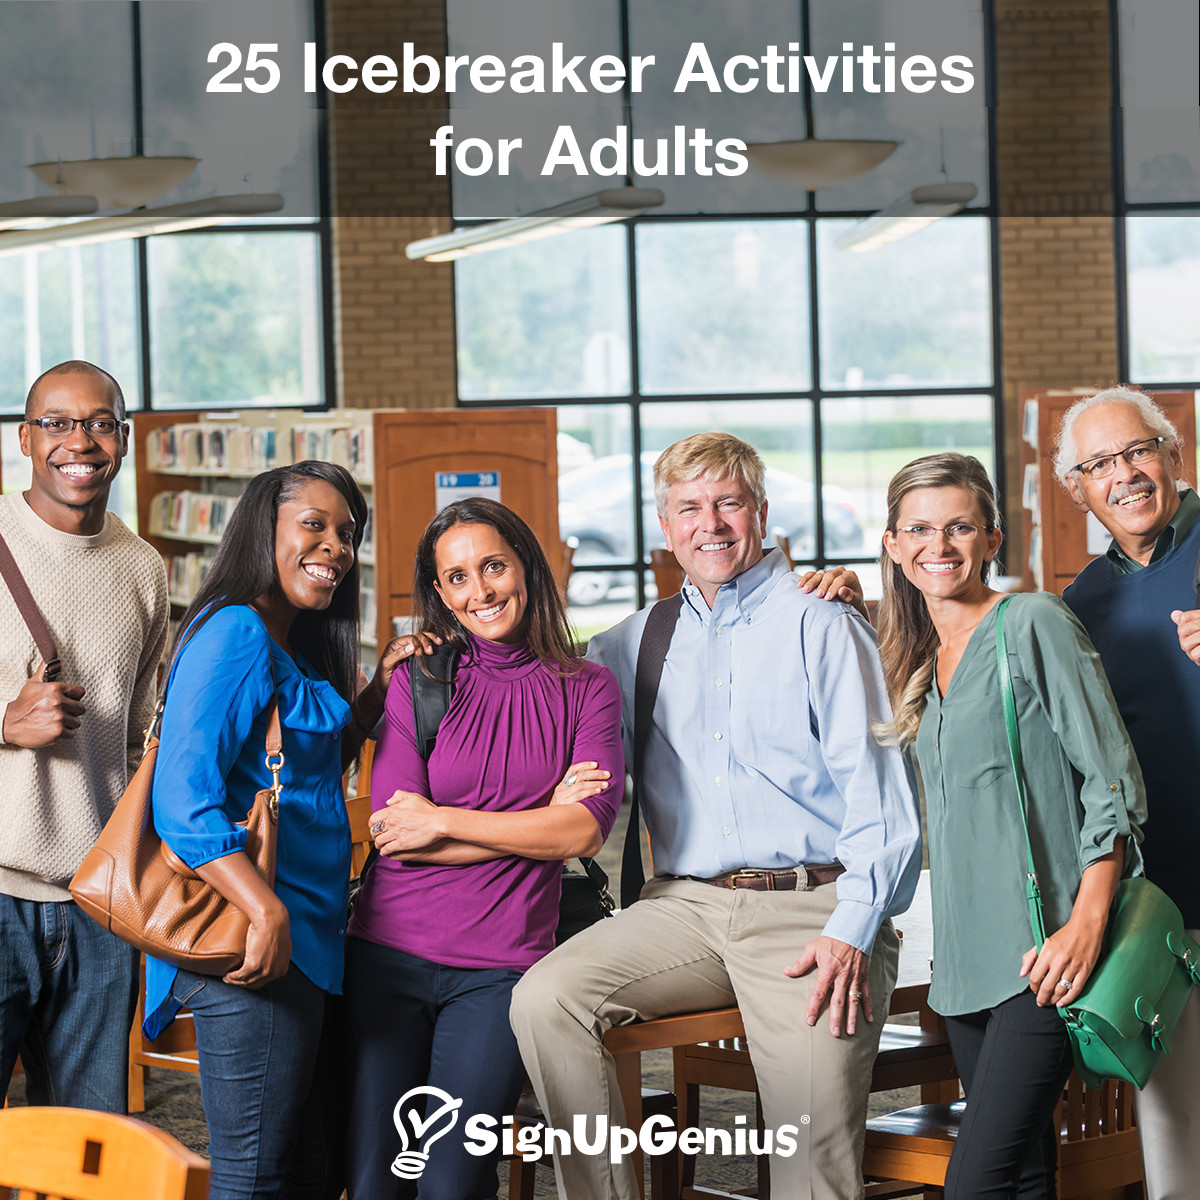 Fun Group Ideas For Adults
 25 Icebreaker Activities for Adults